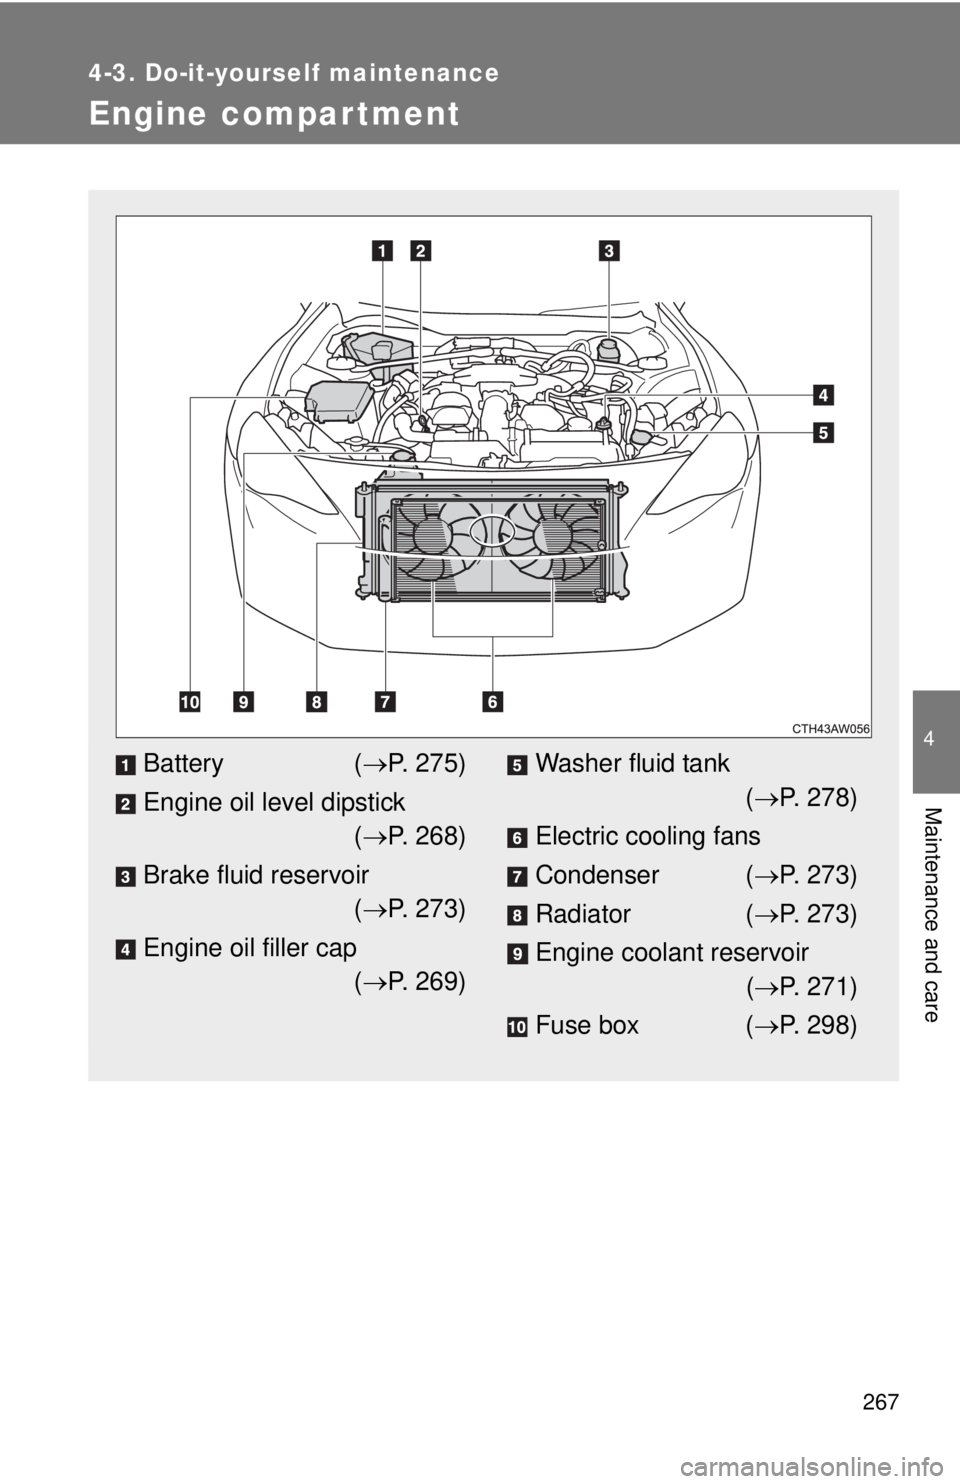 TOYOTA FR-S 2013  Owners Manual (in English) 267
4-3. Do-it-yourself maintenance
4
Maintenance and care
Engine compar tment
Battery( P. 275)
Engine oil level dipstick ( P. 268)
Brake fluid reservoir ( P. 273)
Engine oil filler cap ( 